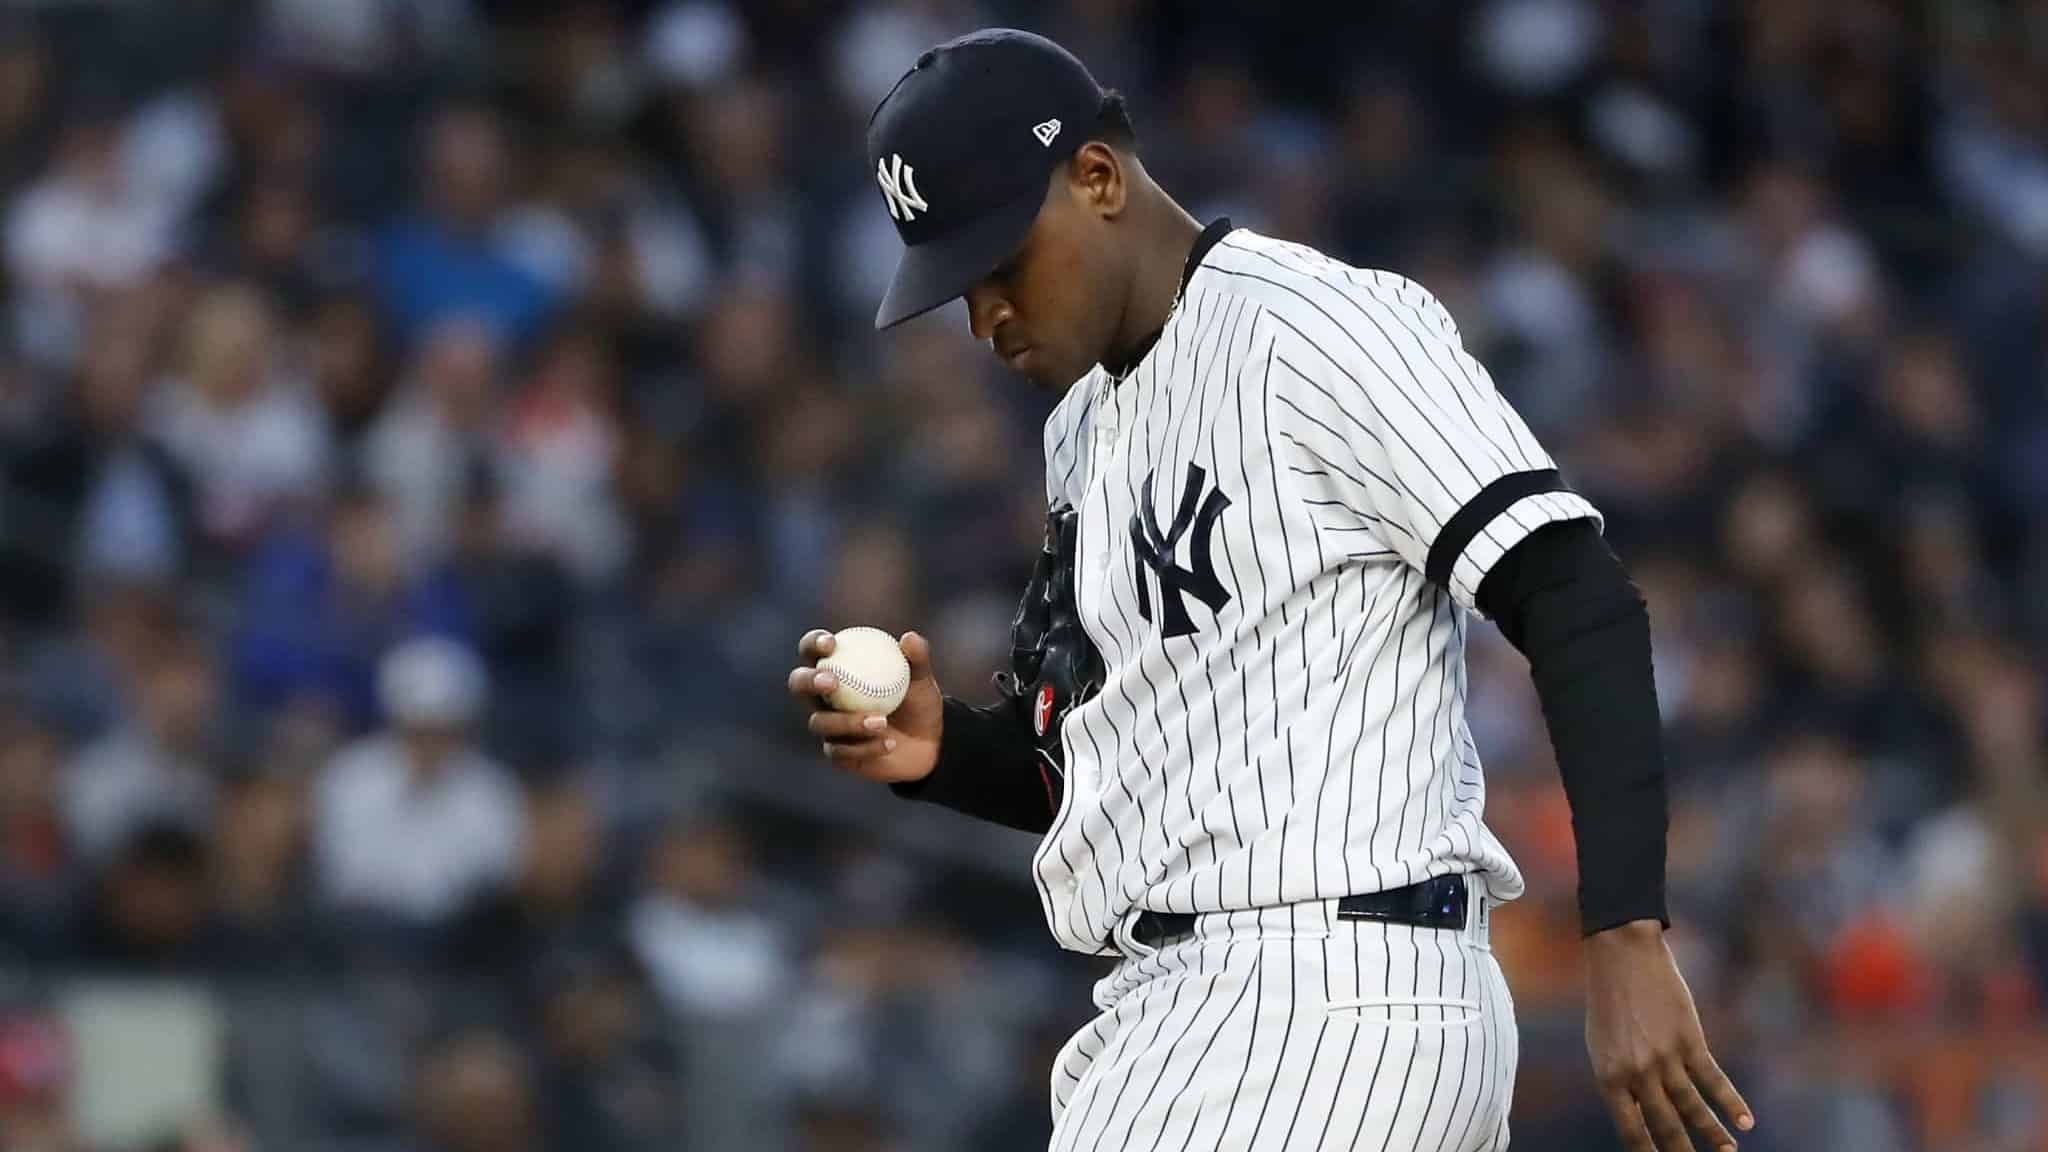 NEW YORK, NEW YORK - OCTOBER 15: Luis Severino #40 of the New York Yankees reacts during the fifth inning against the Houston Astros in game three of the American League Championship Series at Yankee Stadium on October 15, 2019 in New York City.